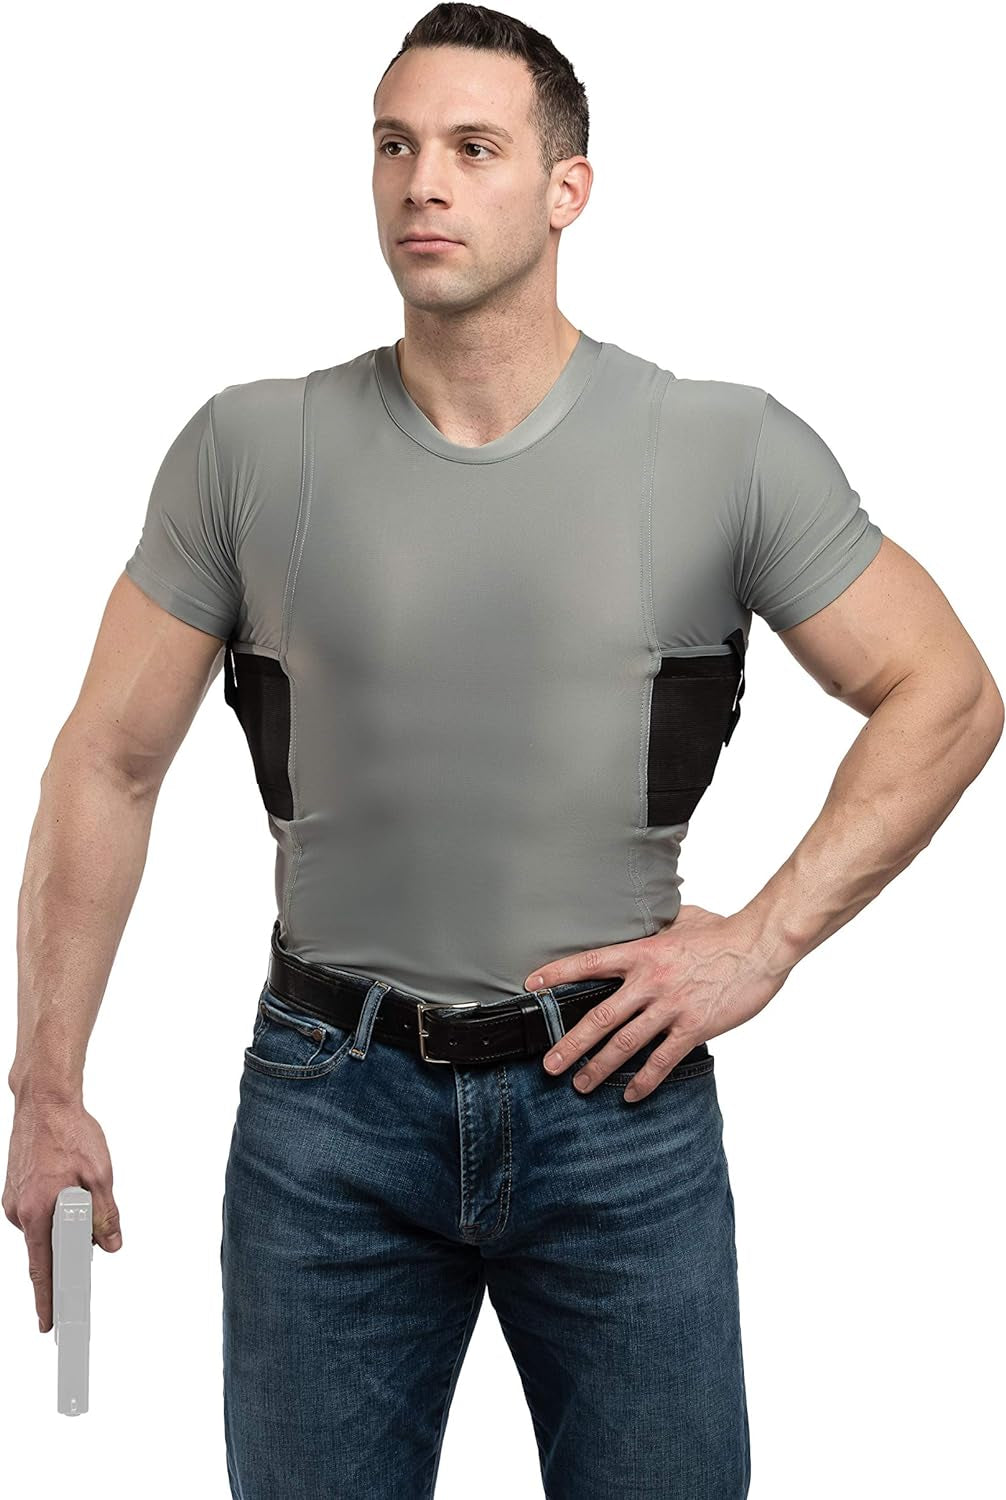 Men’S Pistol Holster Undershirt for CCW Concealed Carry, Crew Neck, All-Day-Comfort Easy Breathe Compression Fabric